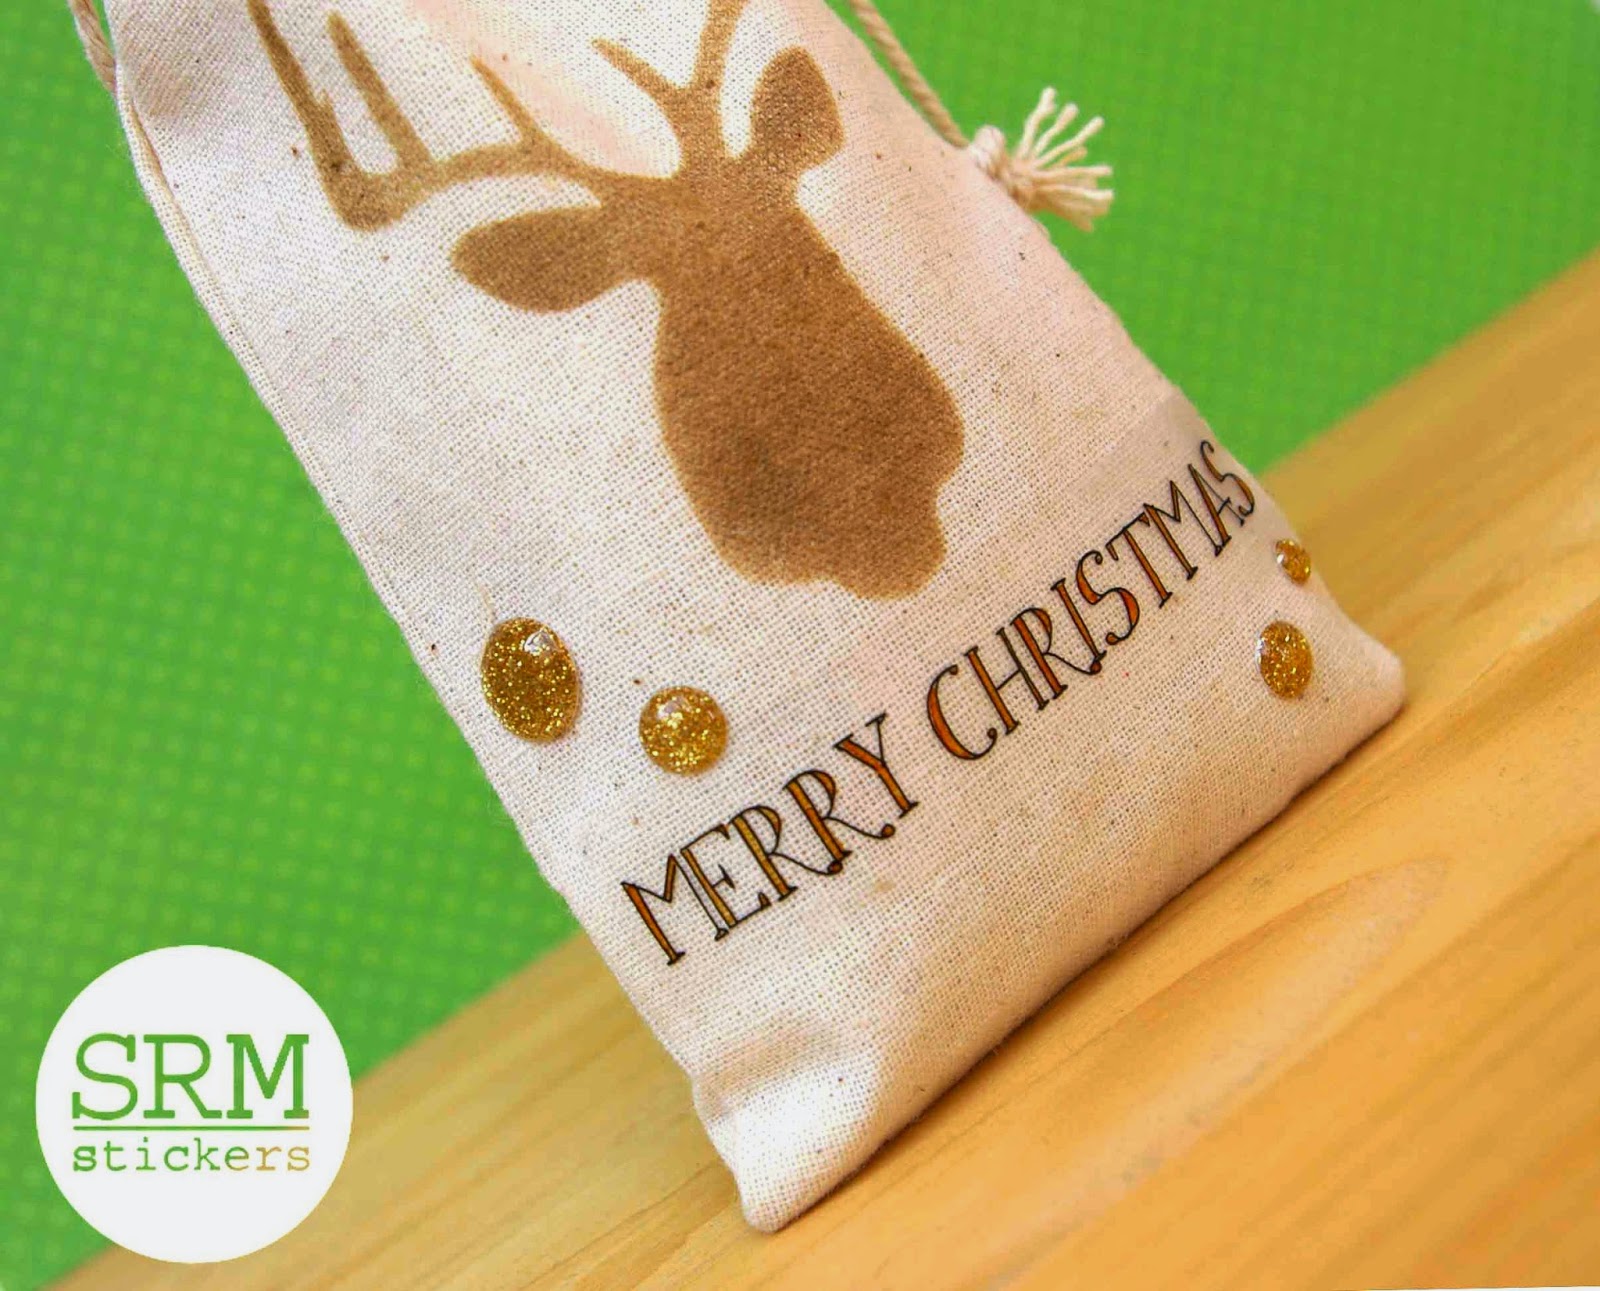 SRM Stickers Blog - Christmas Gift Bags by Lorena - #muslinbags #christmas #giftbag #stickers #stencilvinyl #diy